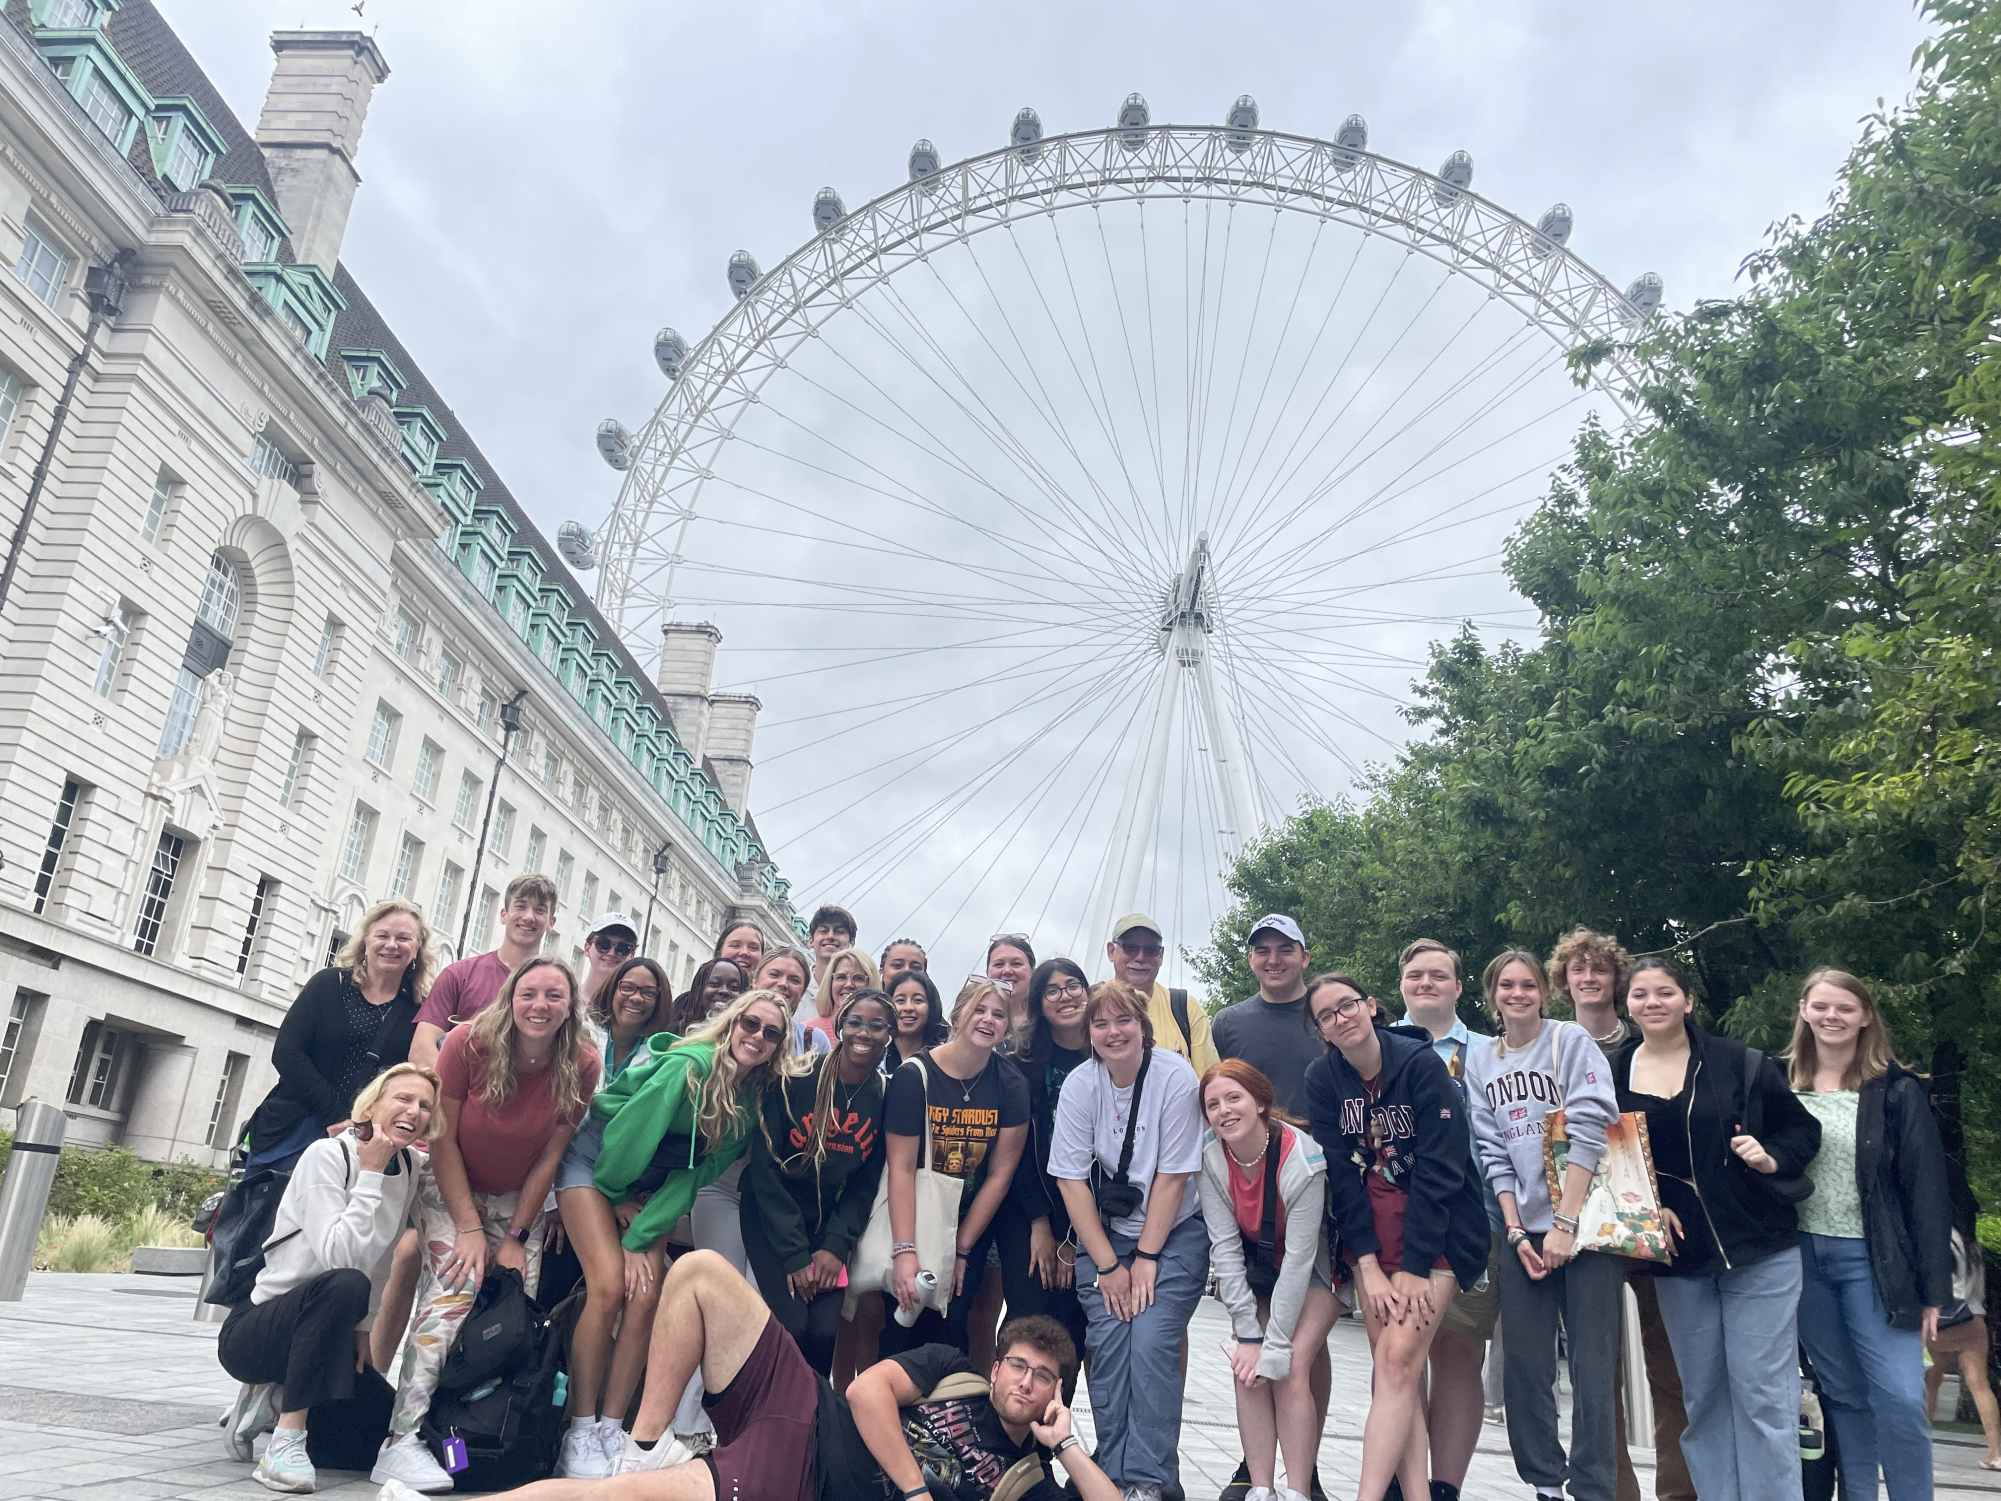 The 2023 EFTour group, led by teachers Olivia Ruff and Morgan Kraus, visited London, among other cities in the summer of 2023. This summer, Ruff and Kraus will lead a different group of students back to Europe!